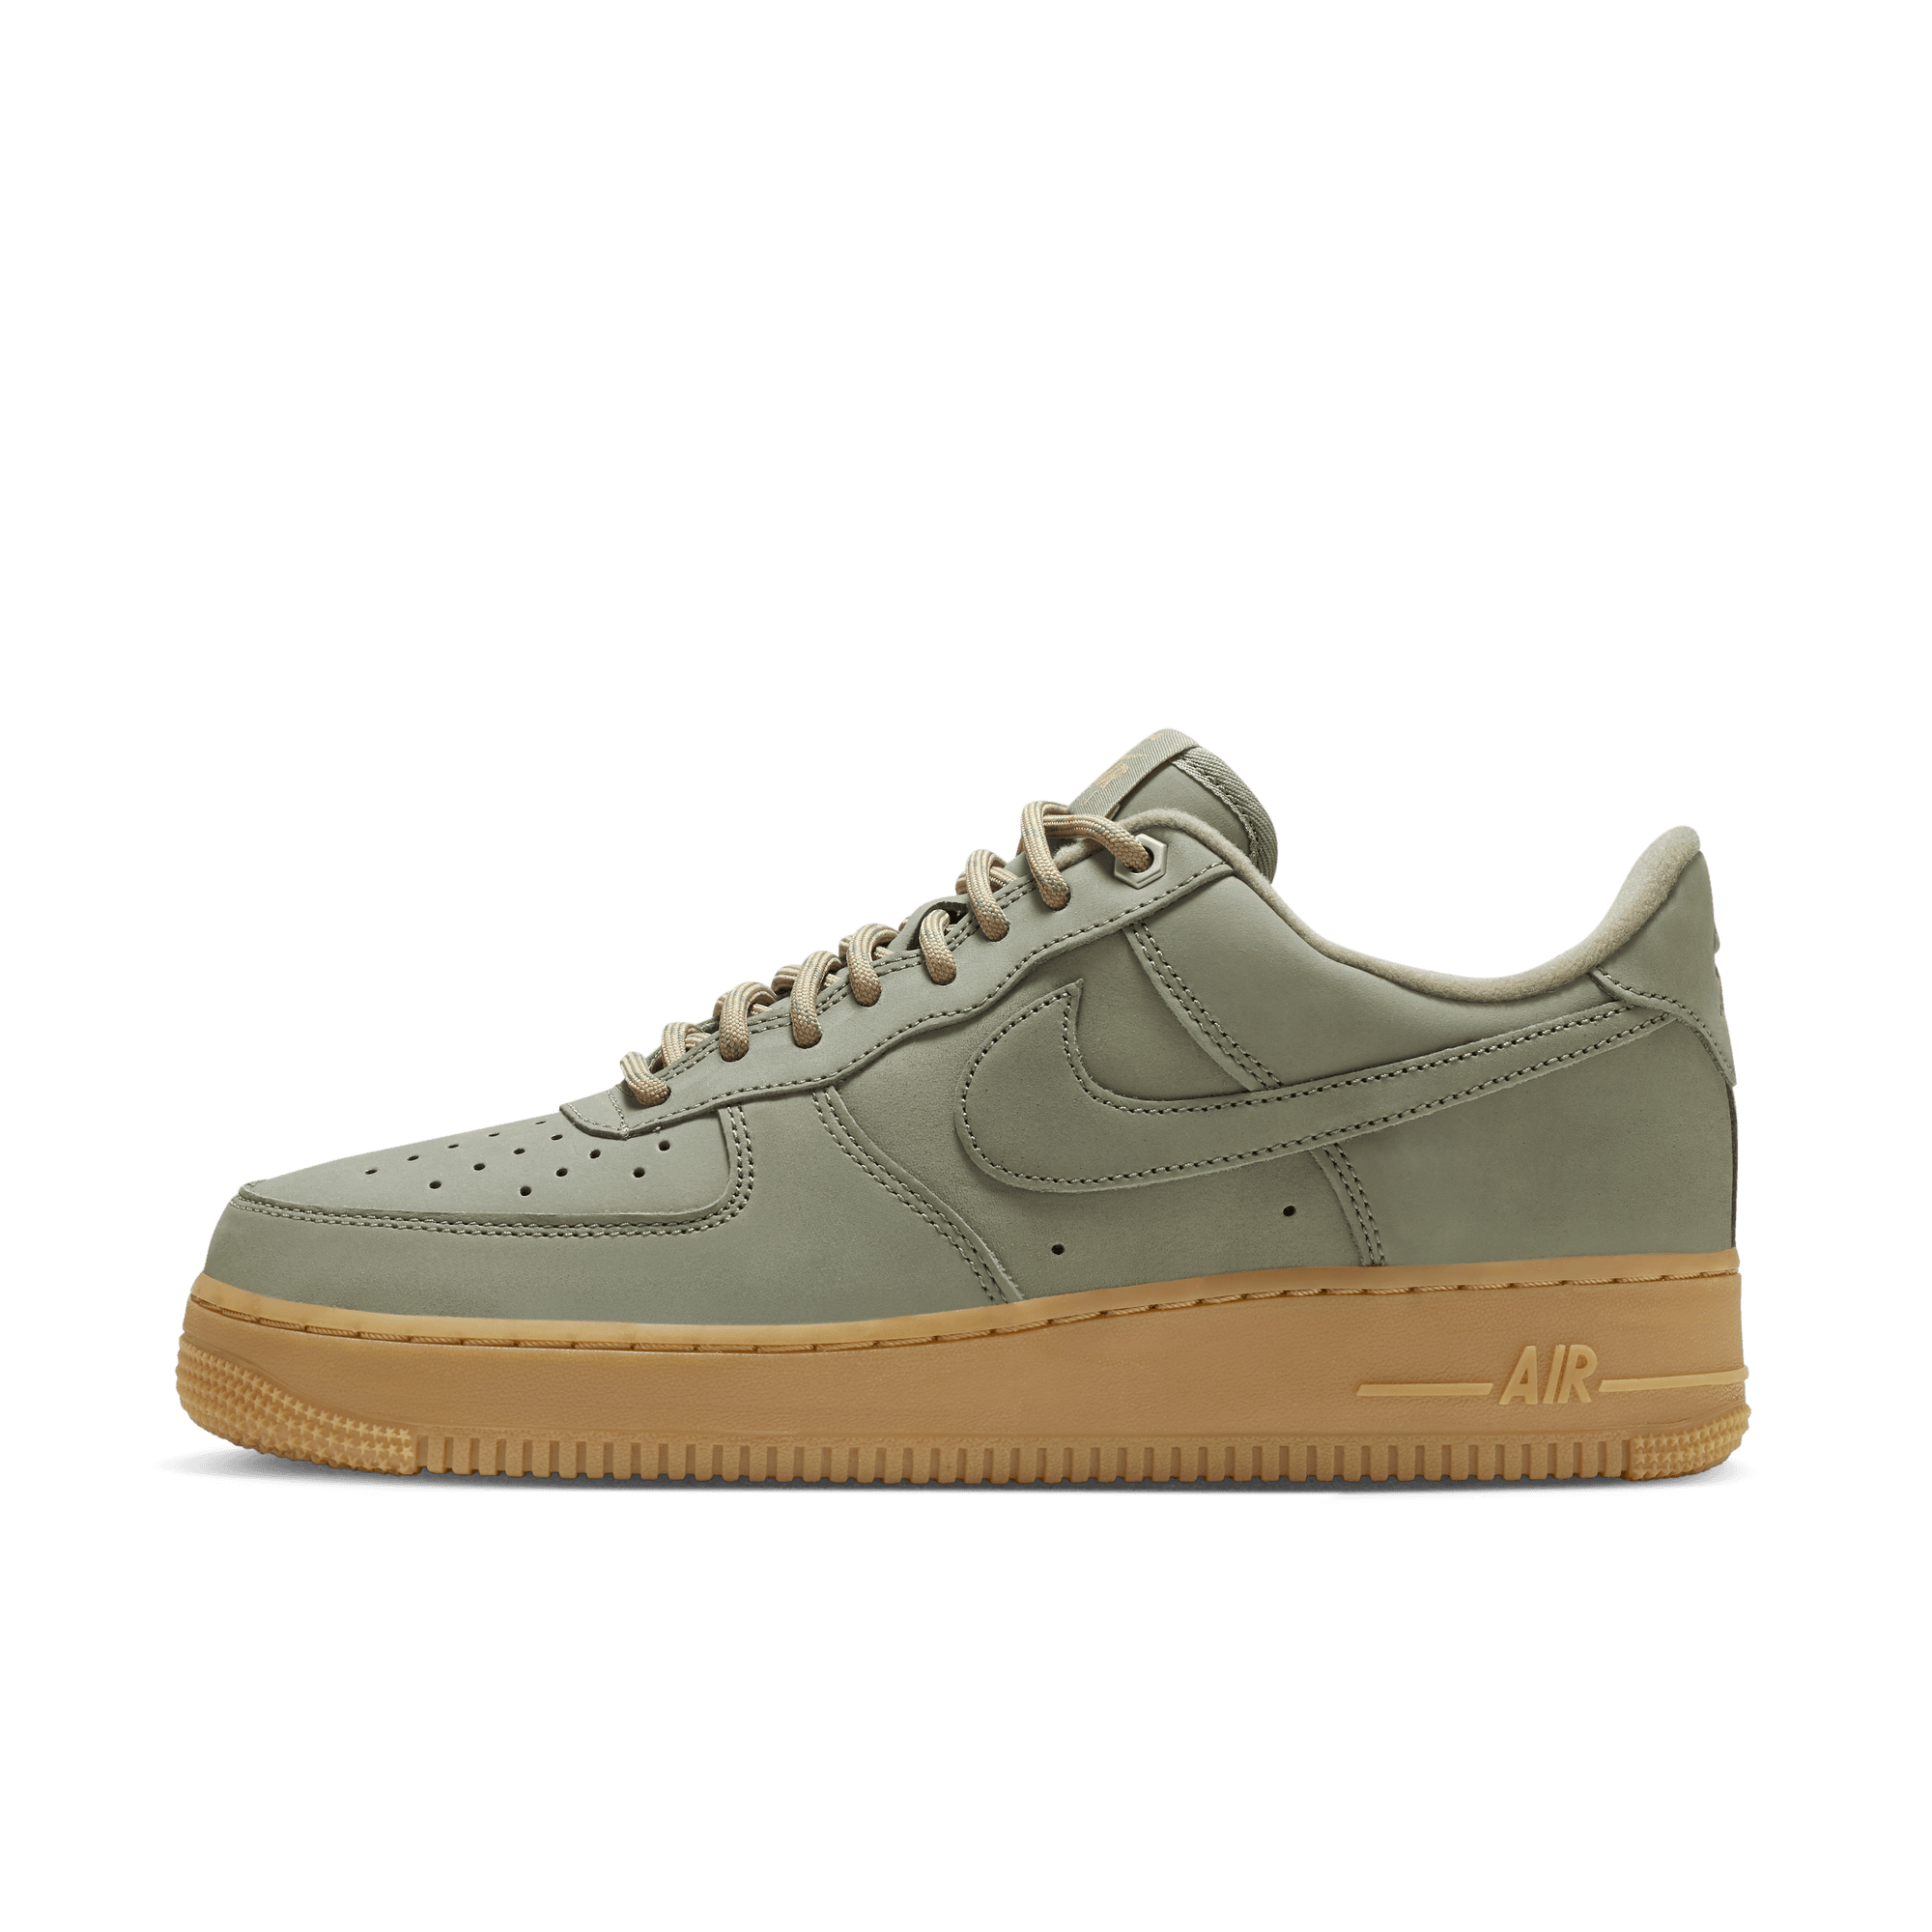 NIKE AIR FORCE 1 '07 WB MEN'S SHOES